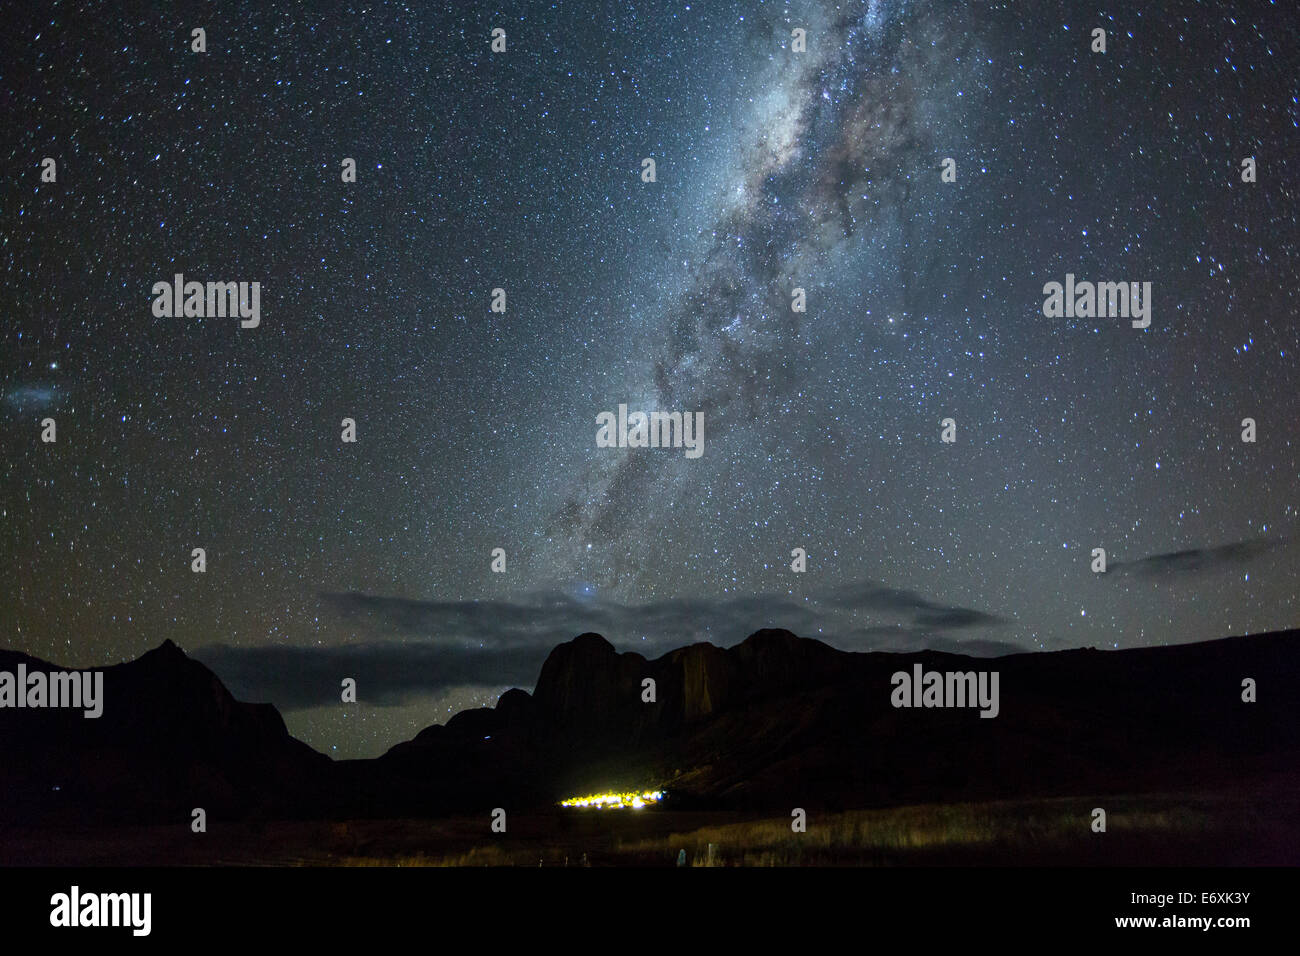 Southern starry Sky with milky way, over the Tsaranoro Mountain Range, South Madagascar, Africa Stock Photo